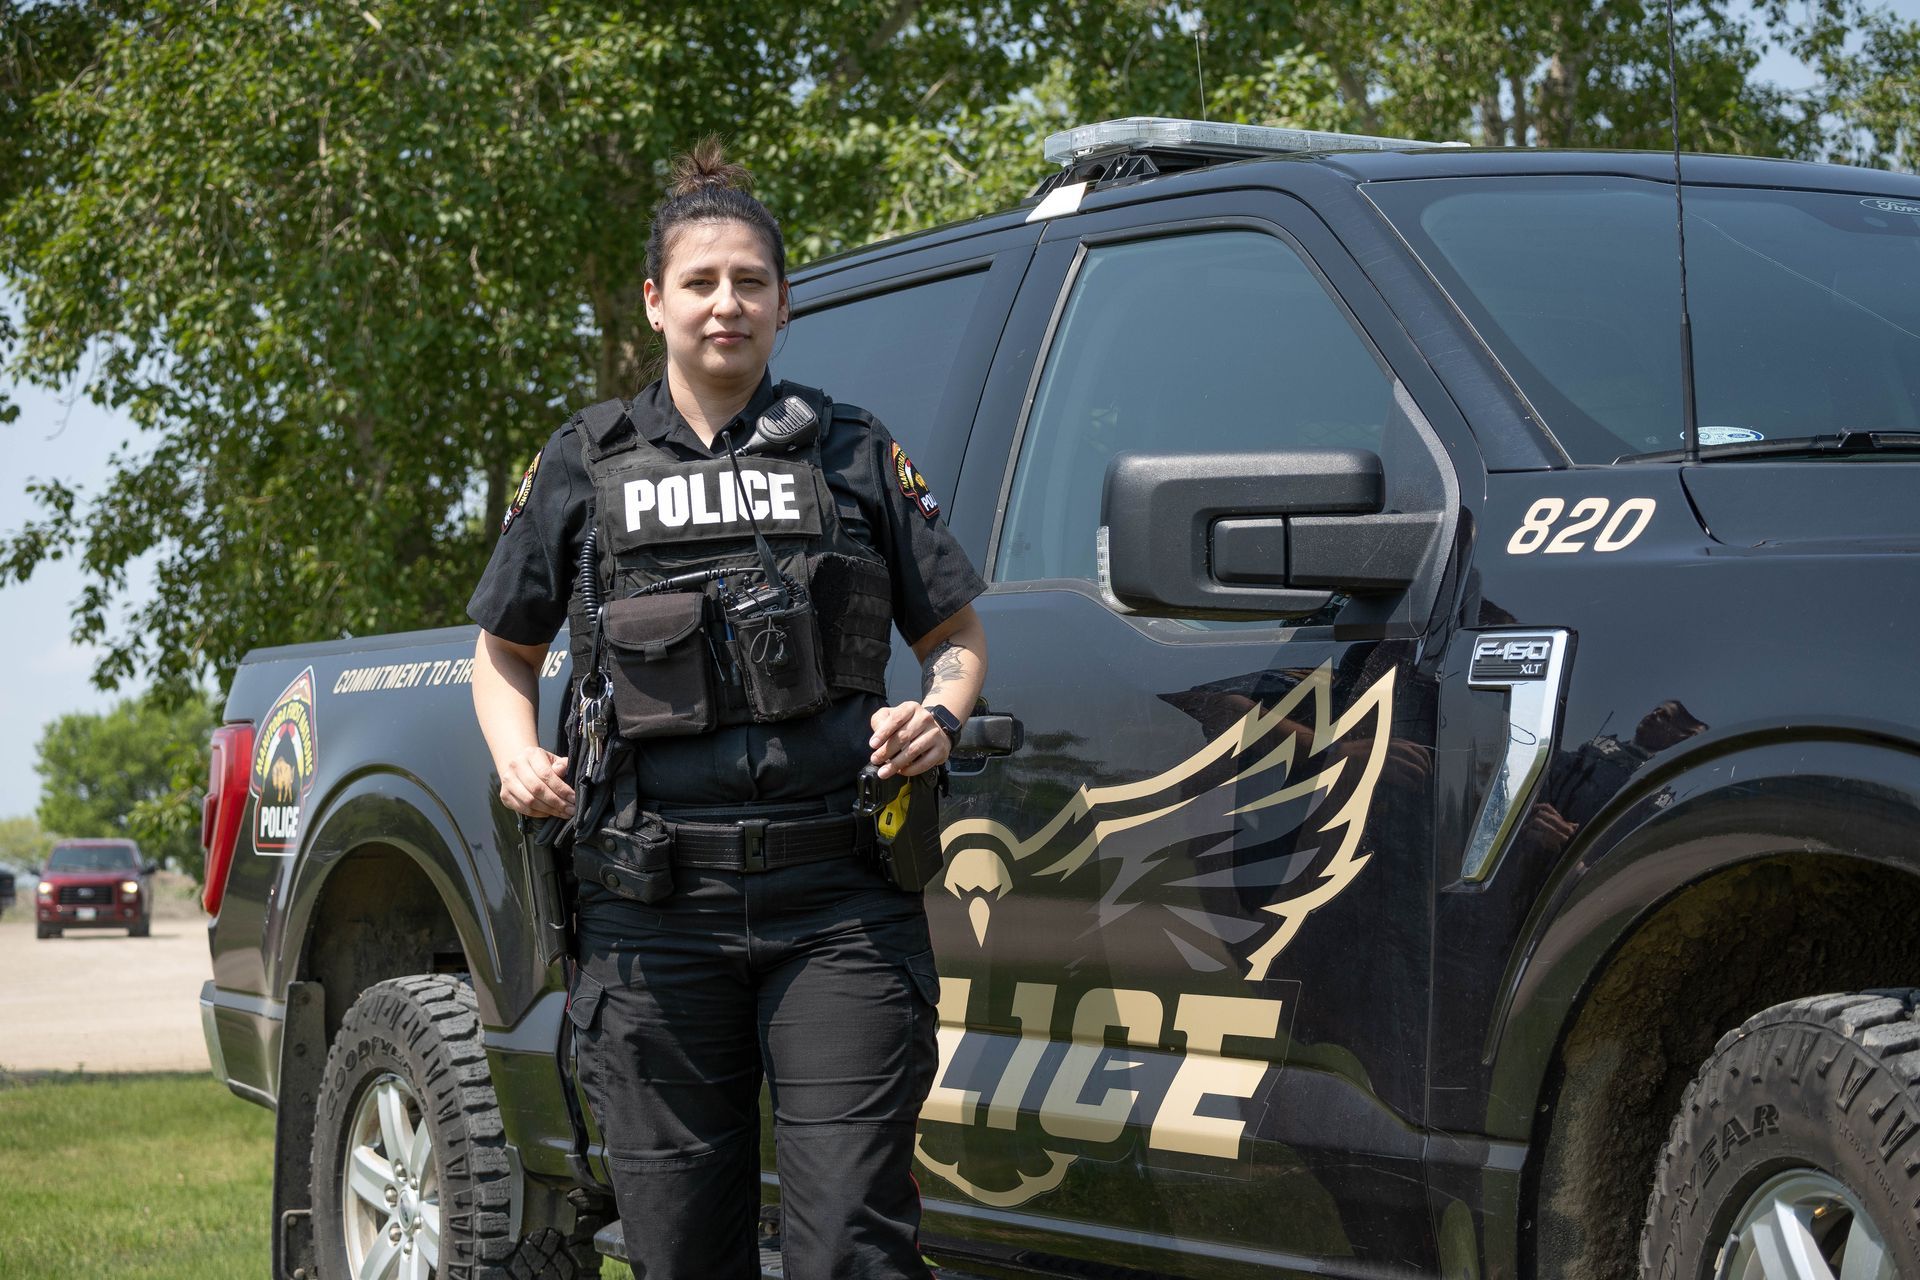 MFNPS-Manitoba First Nations Police Service - Female Officer with Police Vehicle